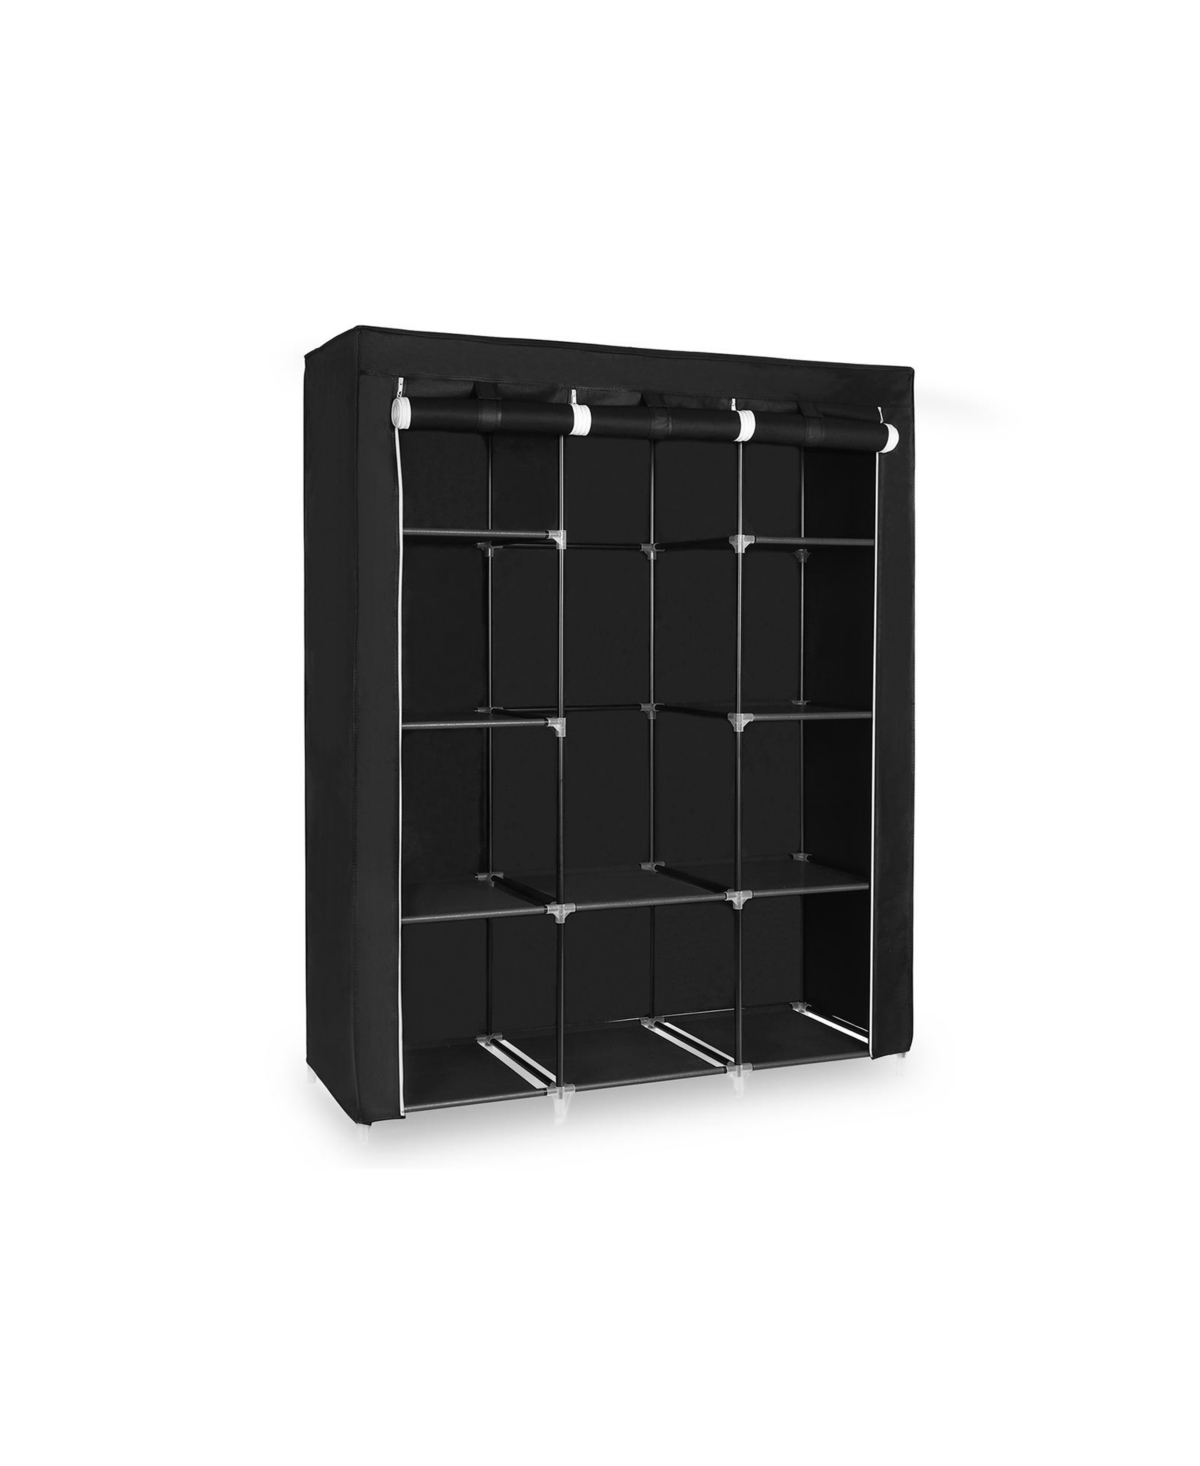 Portable Wardrobe Storage Organizer With 10 Shelves, Quick And Easy To Assemble, Extra Space - Grey